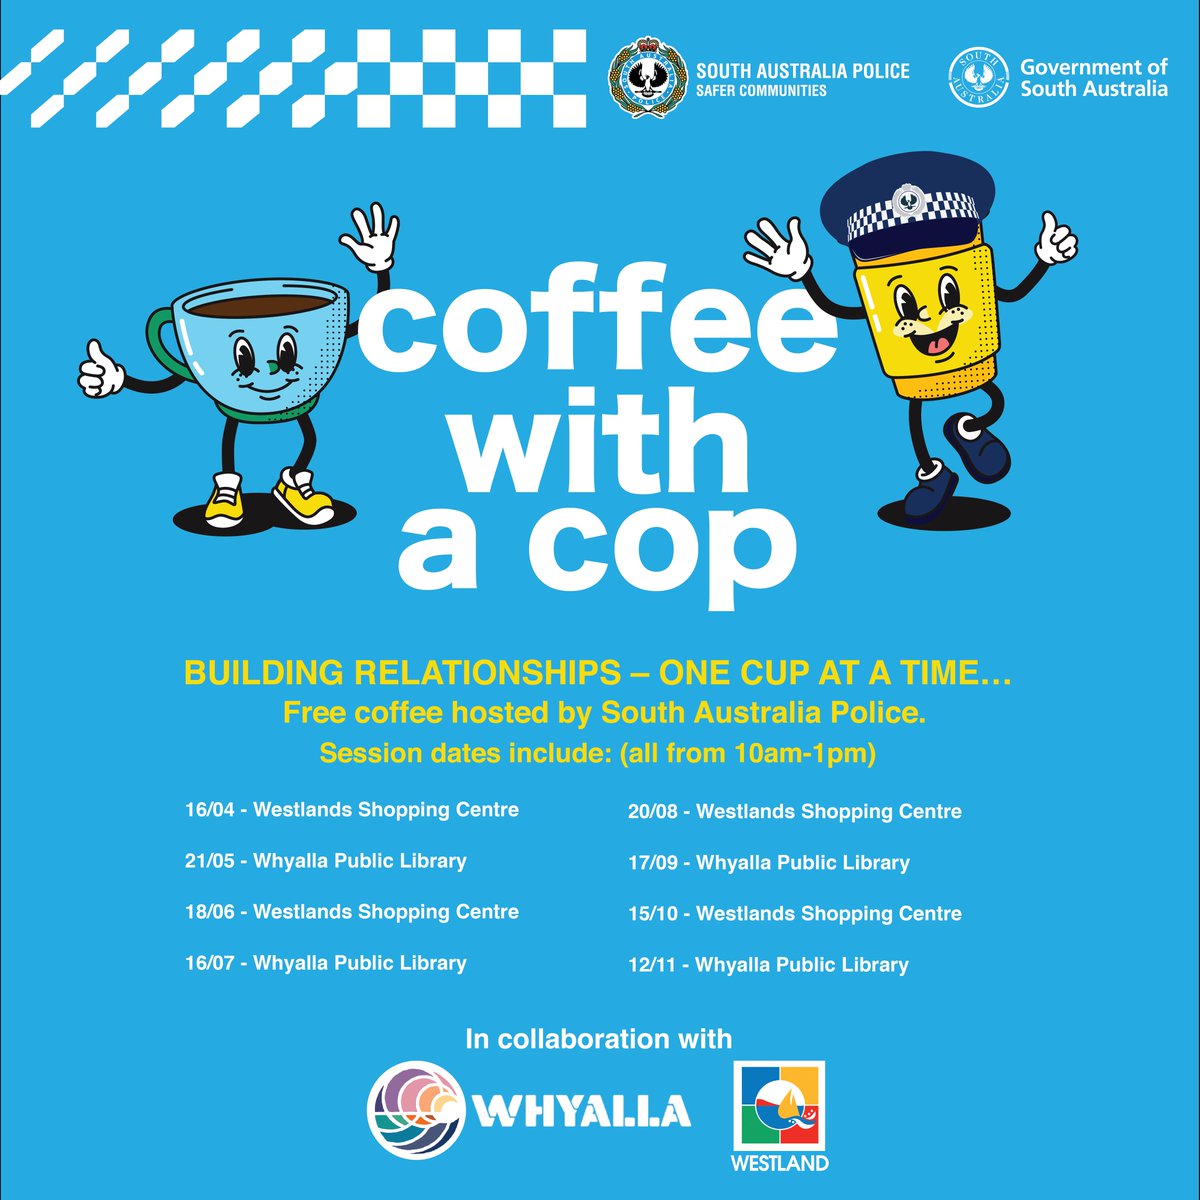 Join us for 'Coffee with a Cop' 🚔☕️ We're kicking off with the Westlands Shopping Centre from 10am-1pm on Tuesday 16 April. 👇 Be sure to out where else you can meet us!